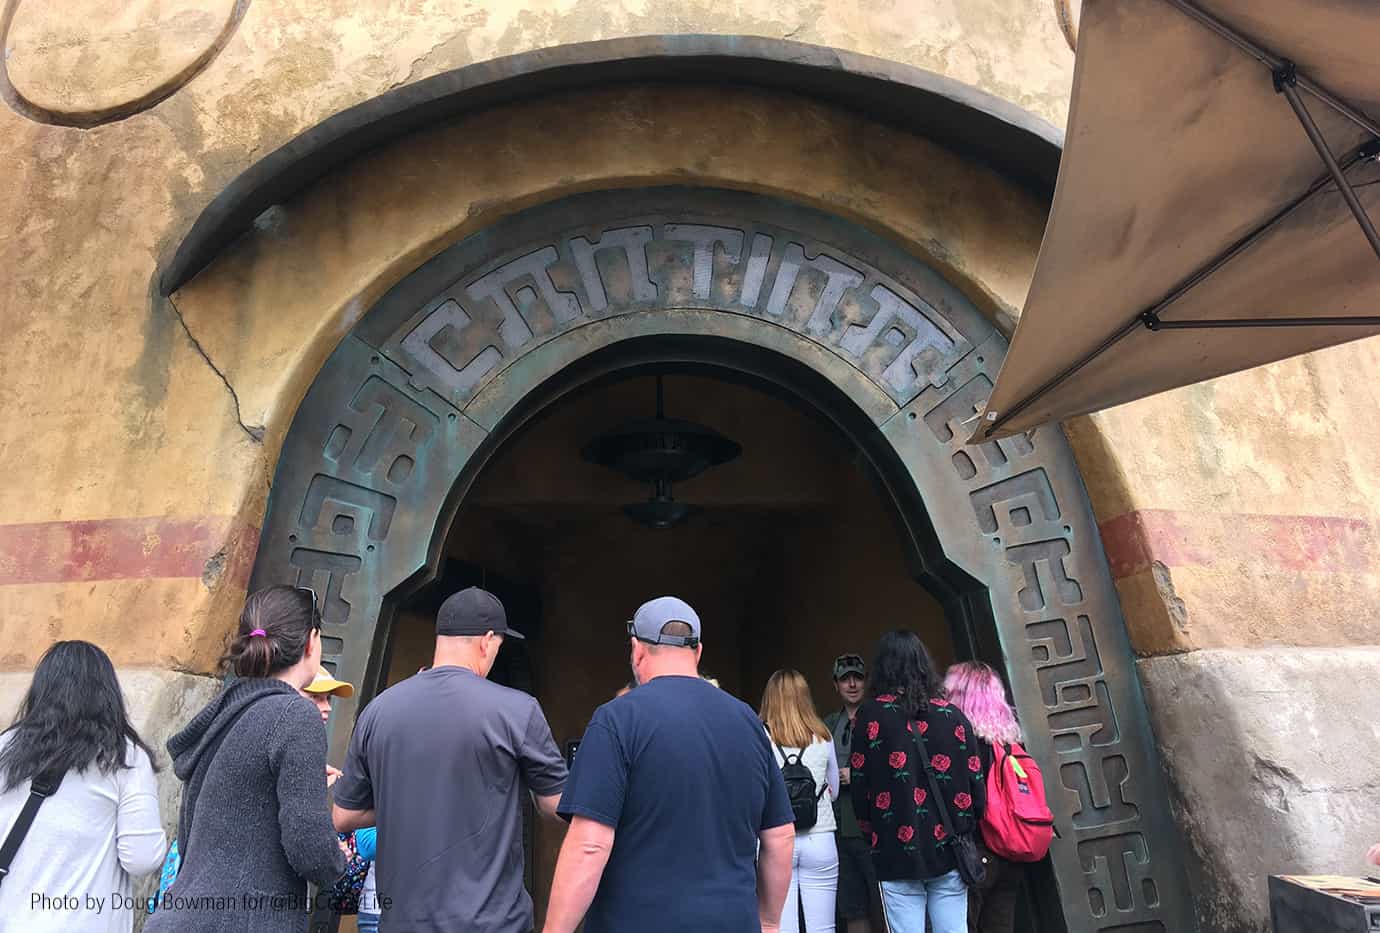 Entrance to Oga's Cantina